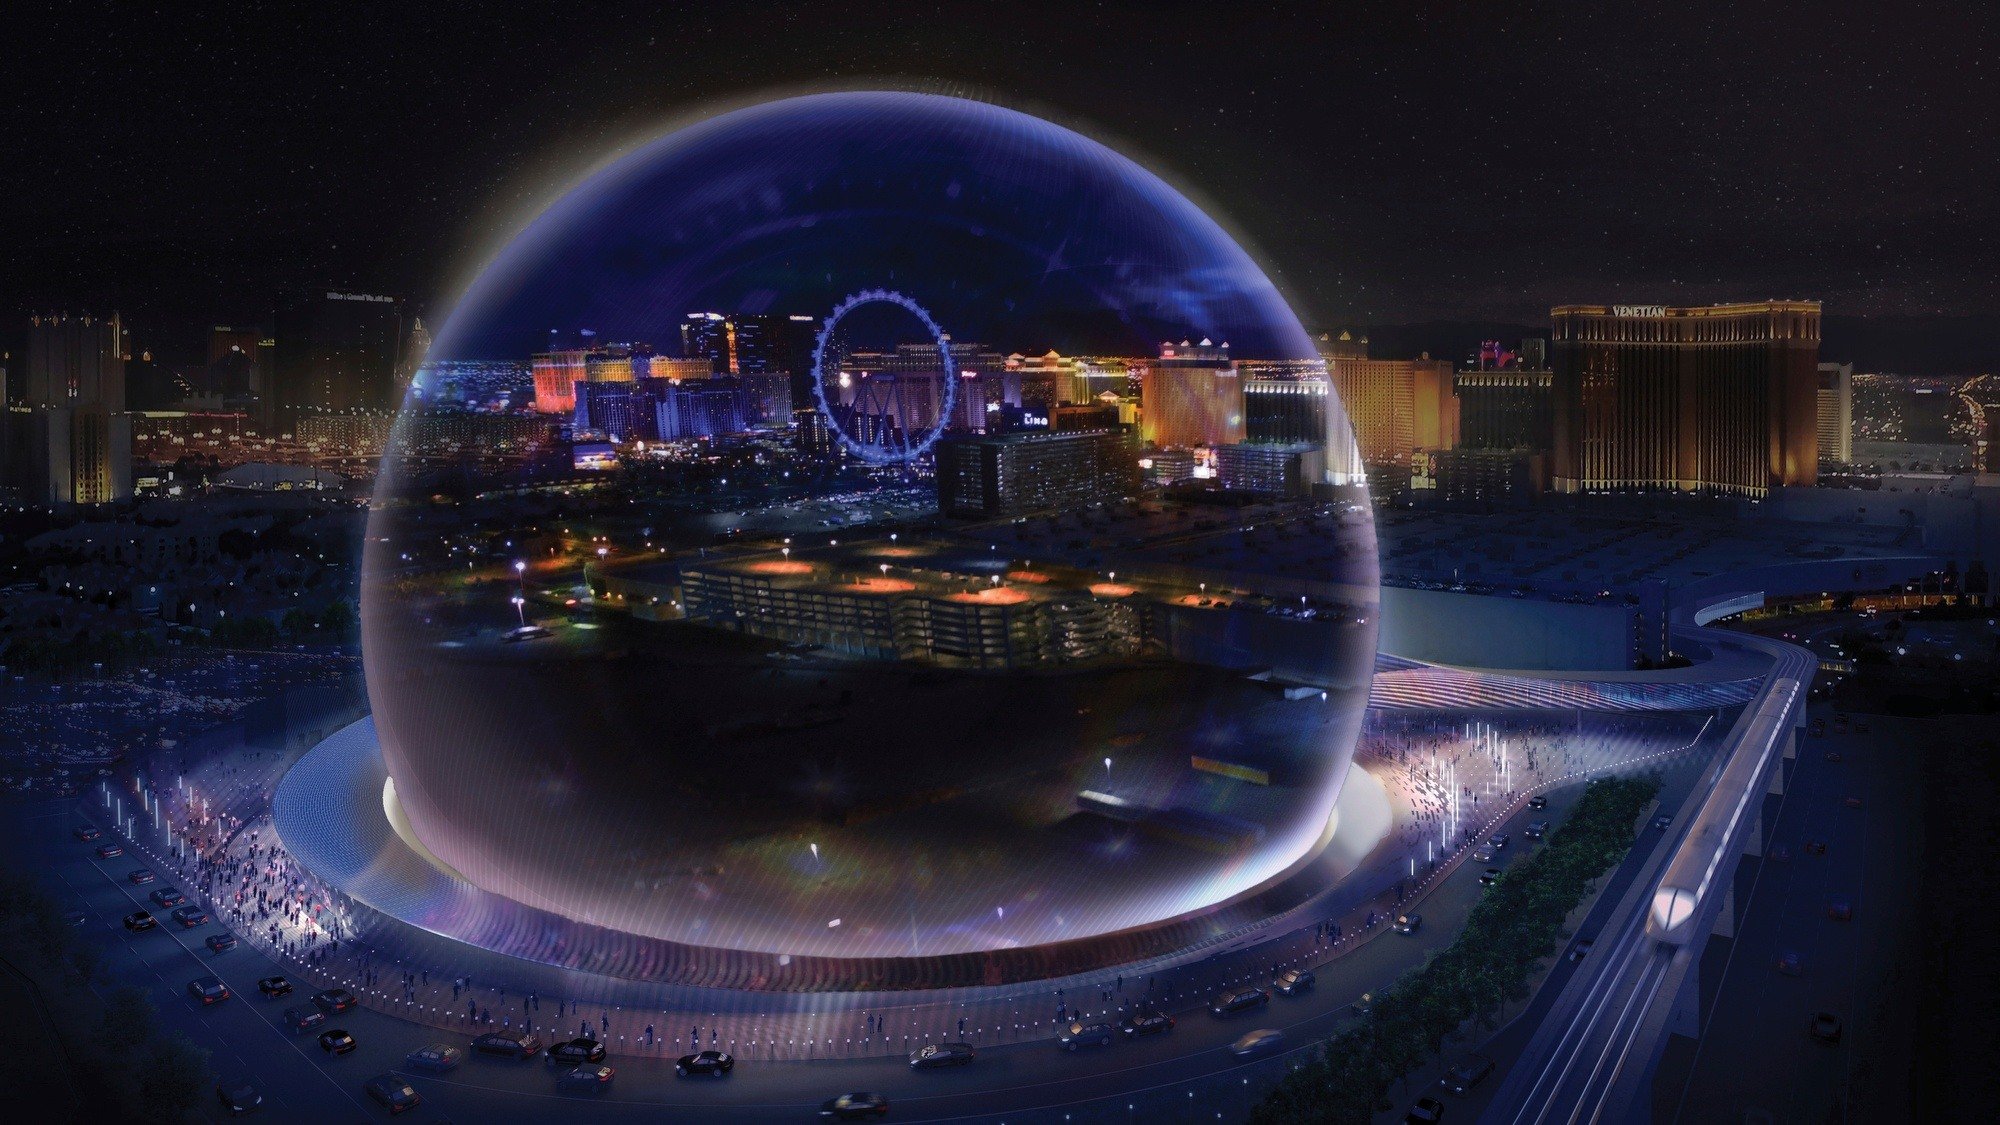 MSG Sphere at the Venetian Breaks Ground, Sandoval Gets Ball Rolling